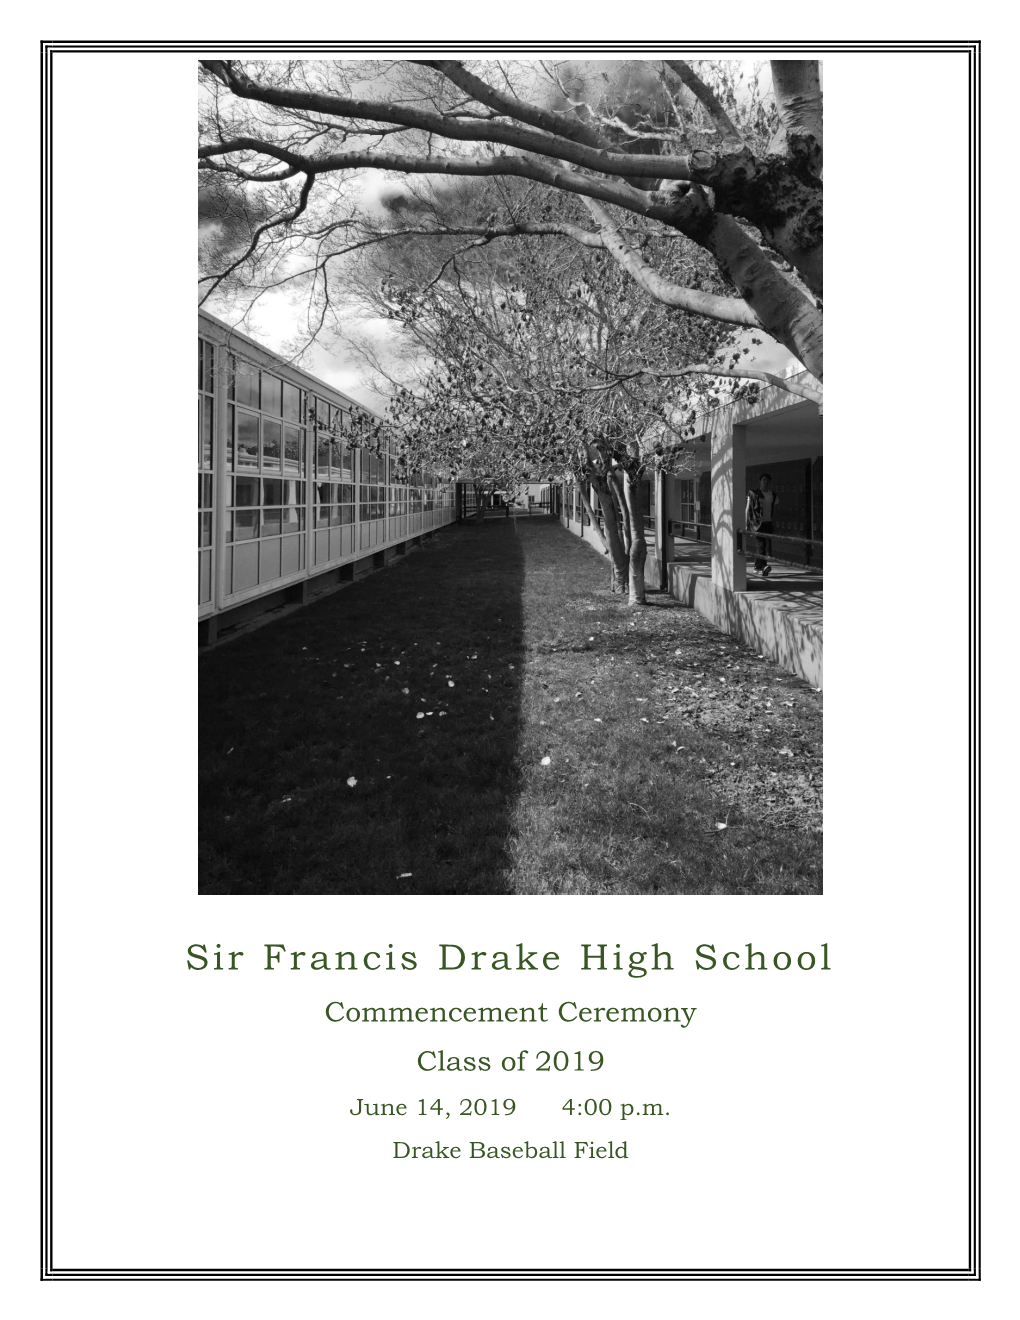 Sir Francis Drake High School Commencement Ceremony Class of 2019 June 14, 2019 4:00 P.M